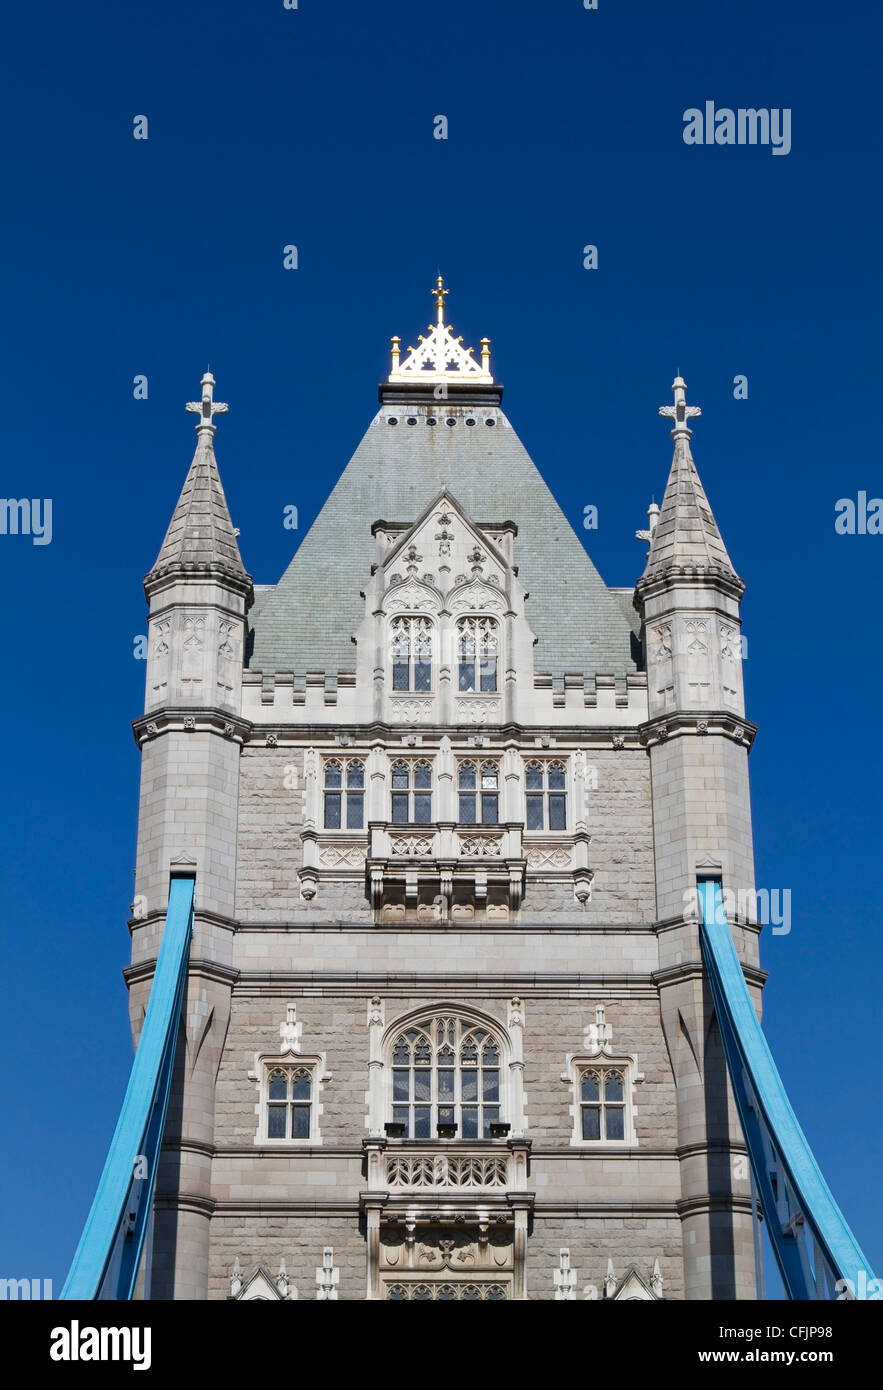 The southern tower of Tower Bridge as seen from the south side of the bridge, London Stock Photo